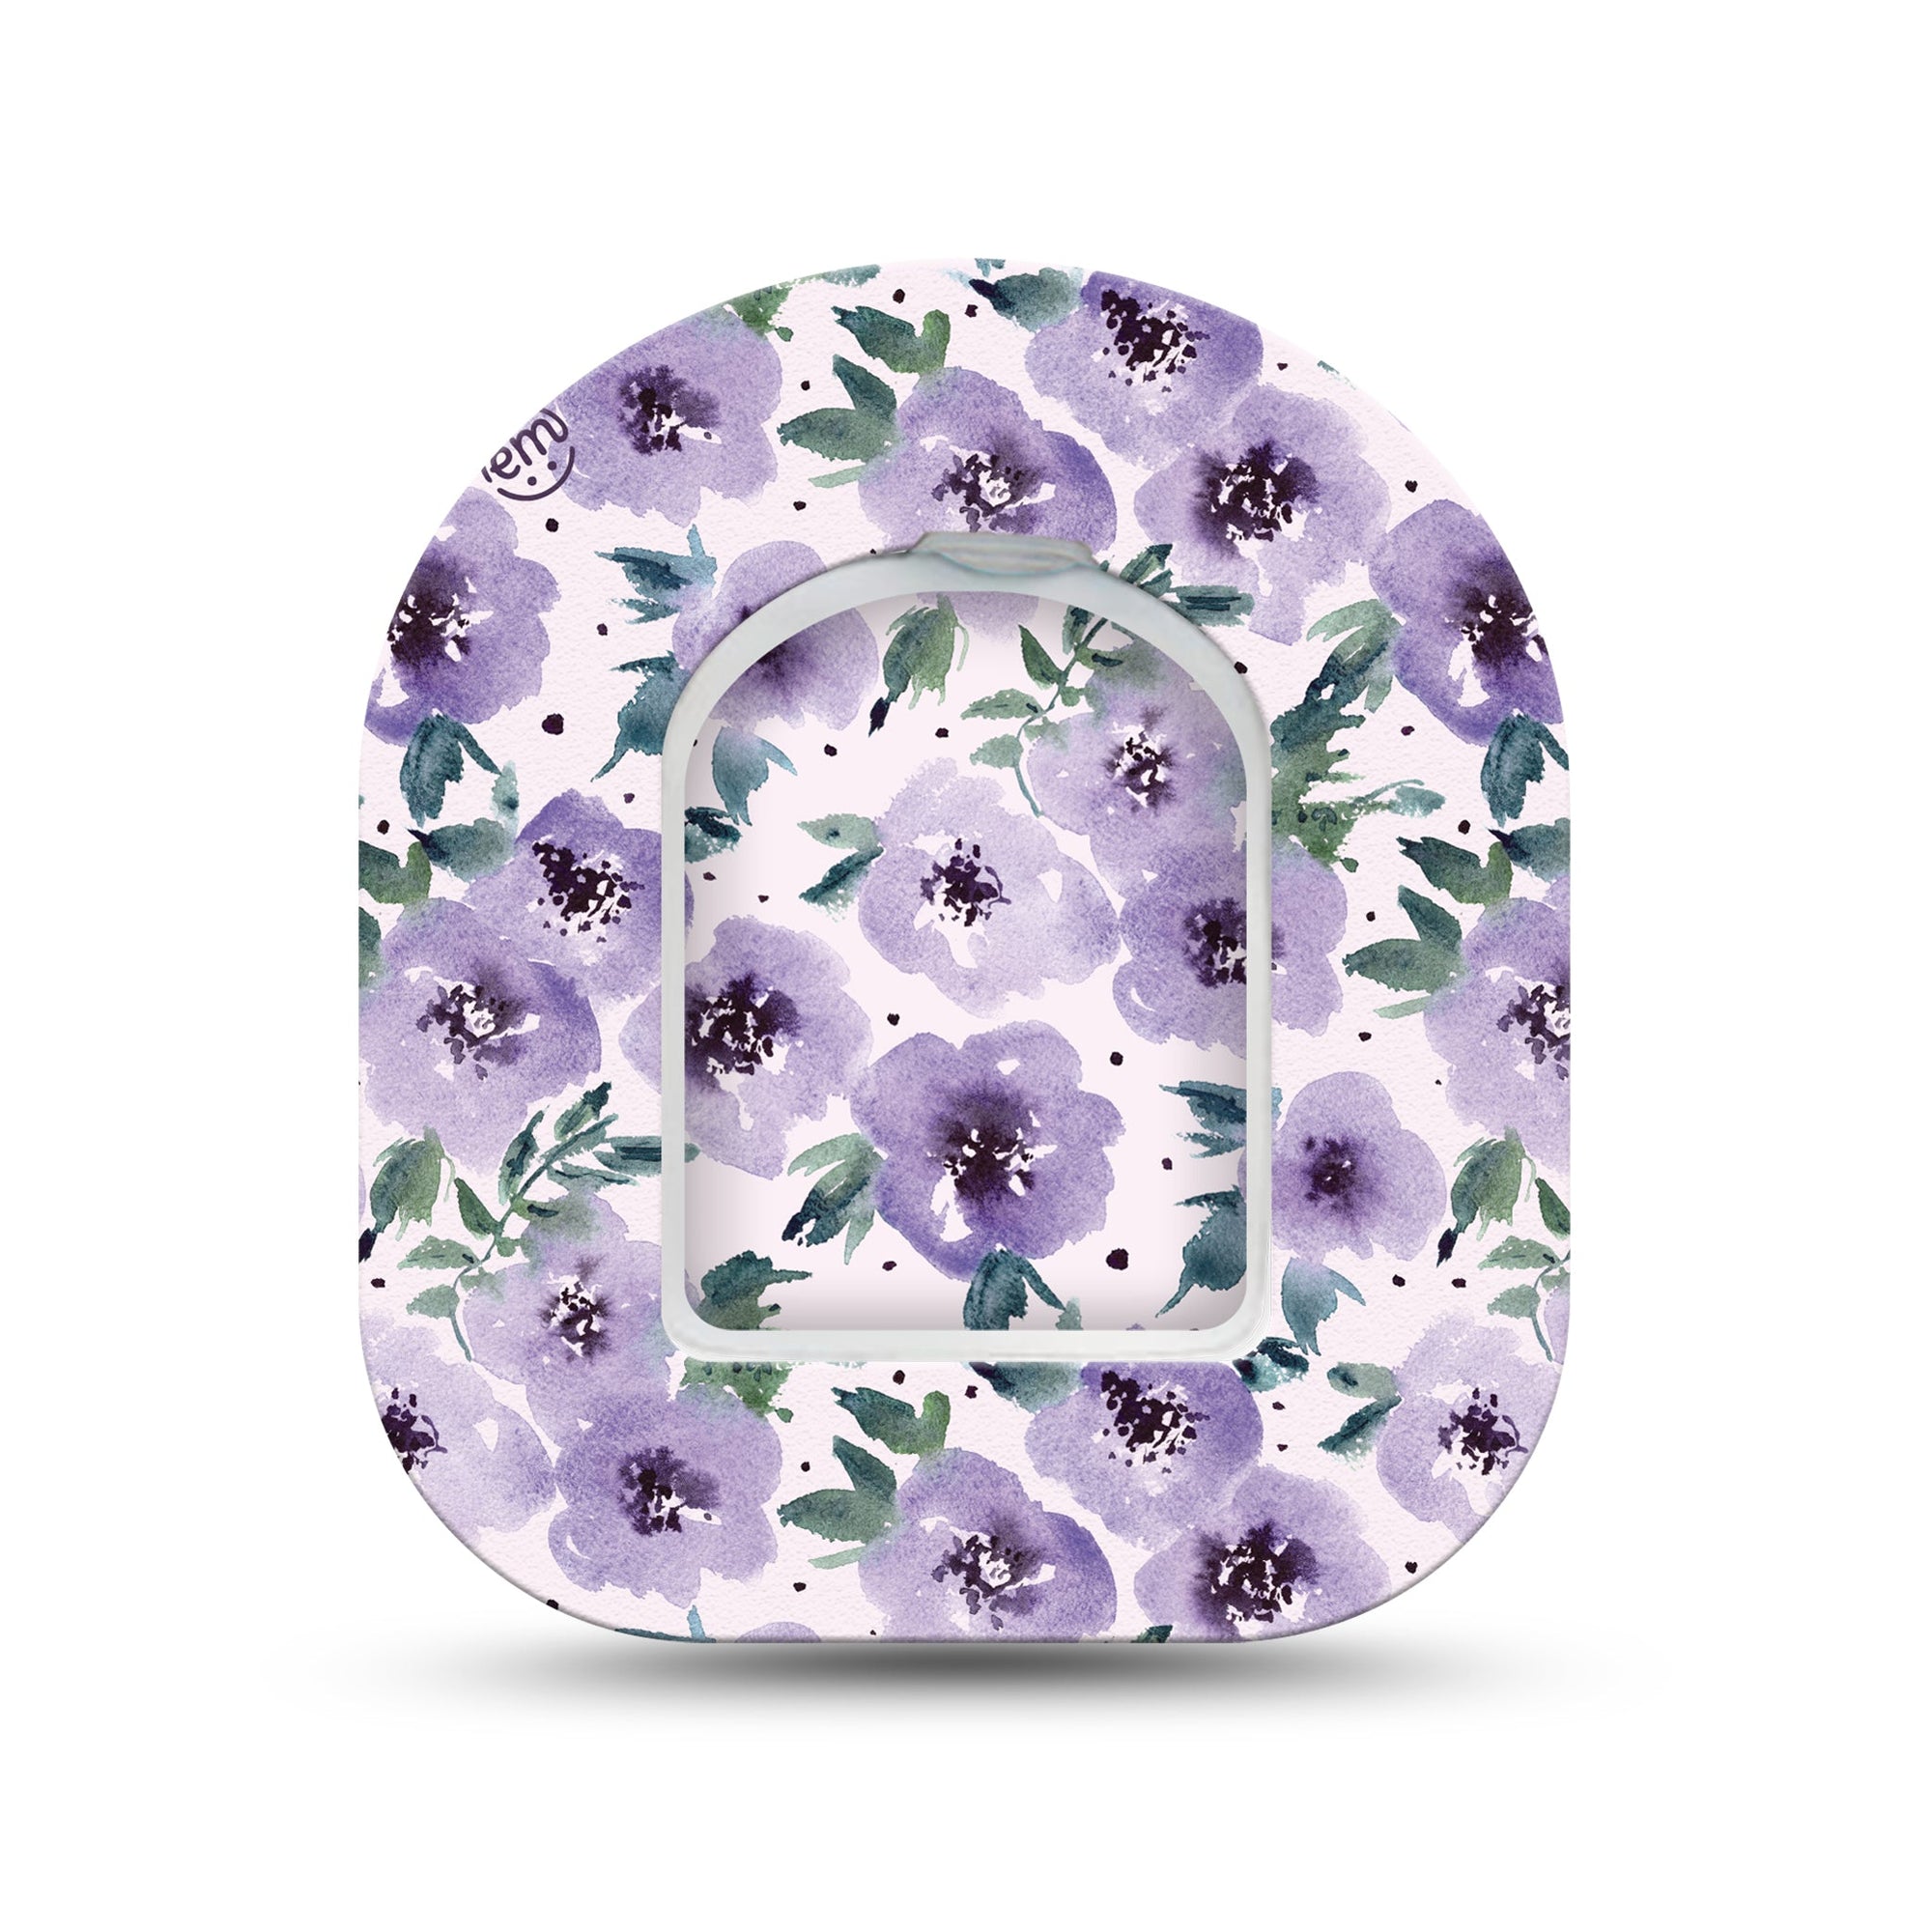 ExpressionMed Flowering Amethyst Pod Mini Tape Single Sticker and Single Tape, Purple Petals Fixing Ring Patch Pump Design